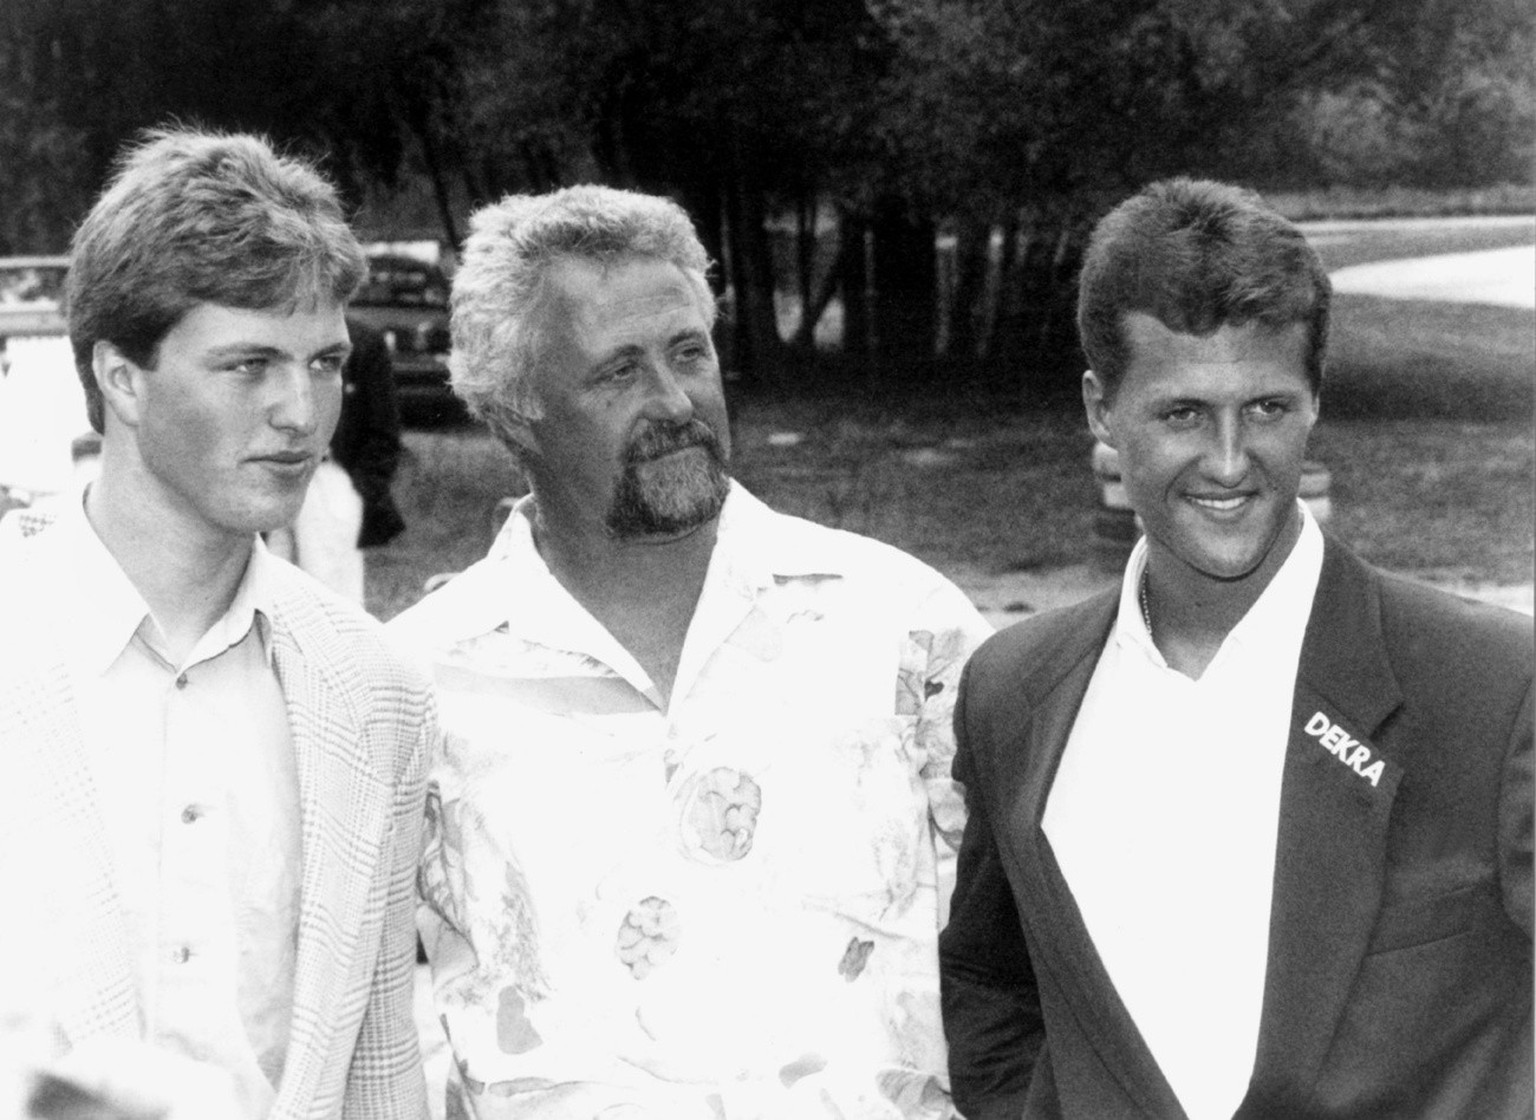 The photo shows Michael Schumacher (R), father Rolf Schumacher (C) and brother Ralf Schumacher (L) in Kerpen, Germany, 19 July 1993. Michael Schumacher announced his retirement on Sunday, 10 September ...